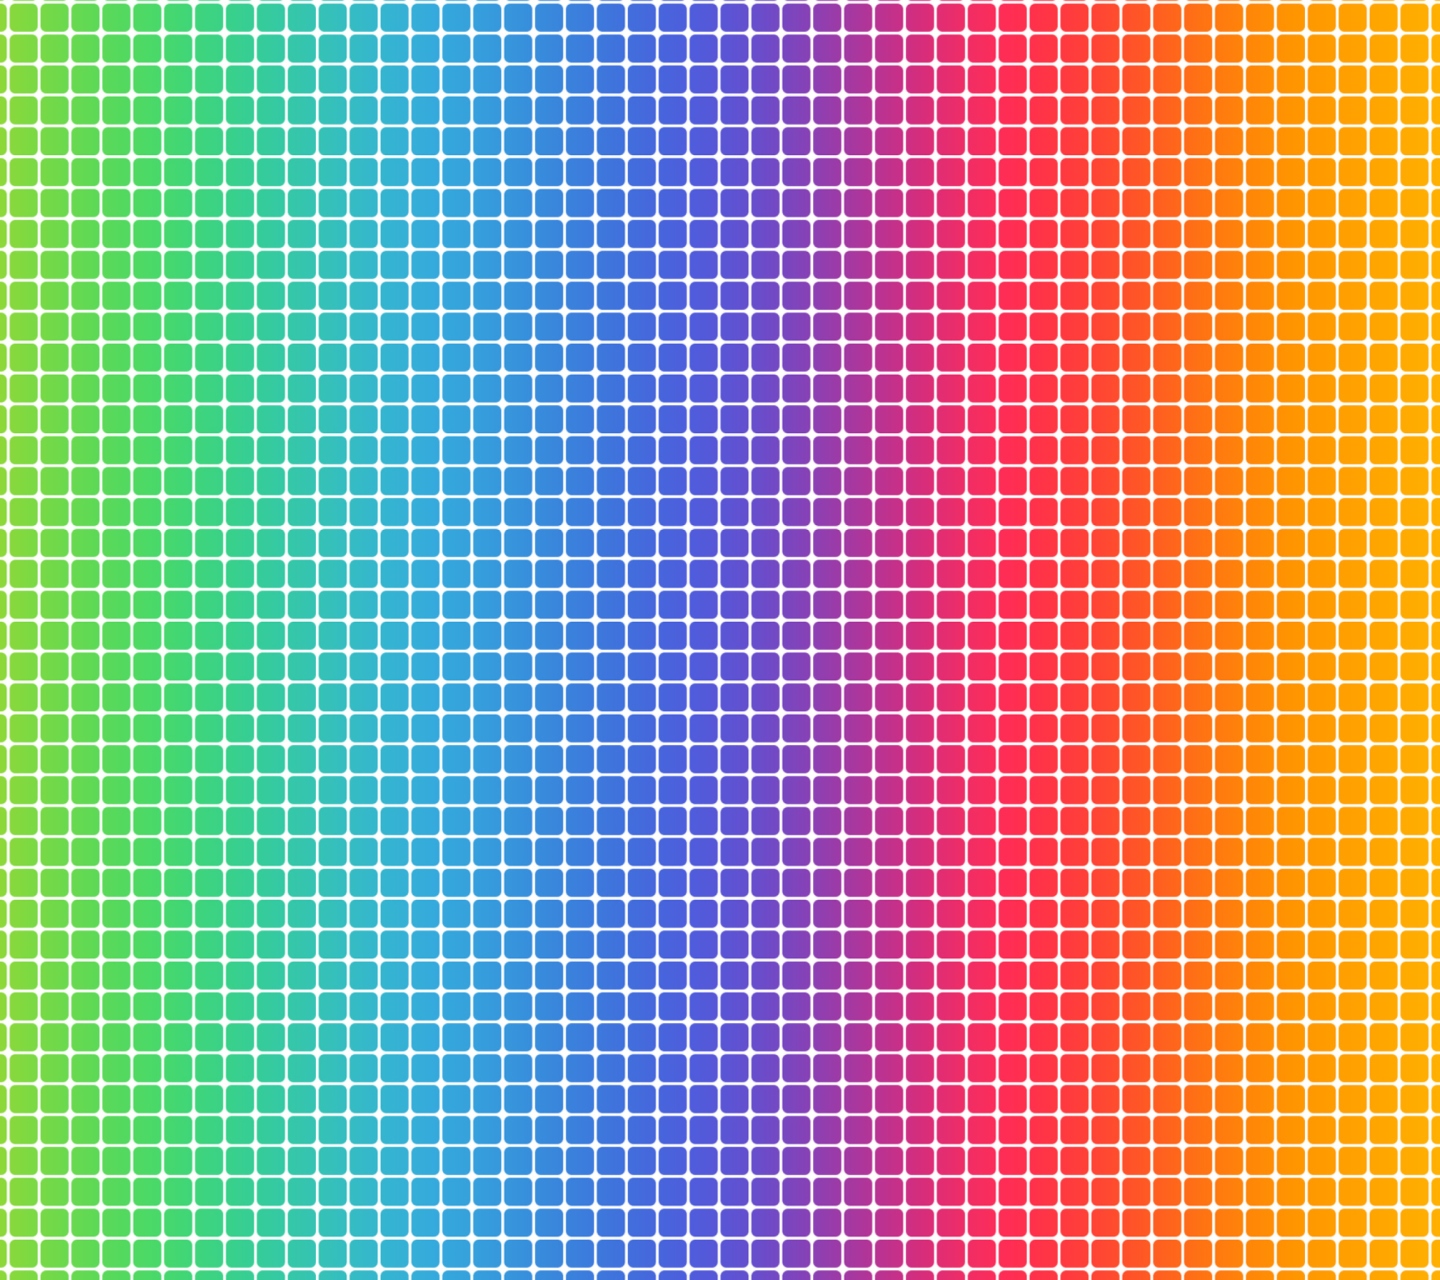 Chat Colourful Wallpaper For Whatsapp - HD Wallpaper 